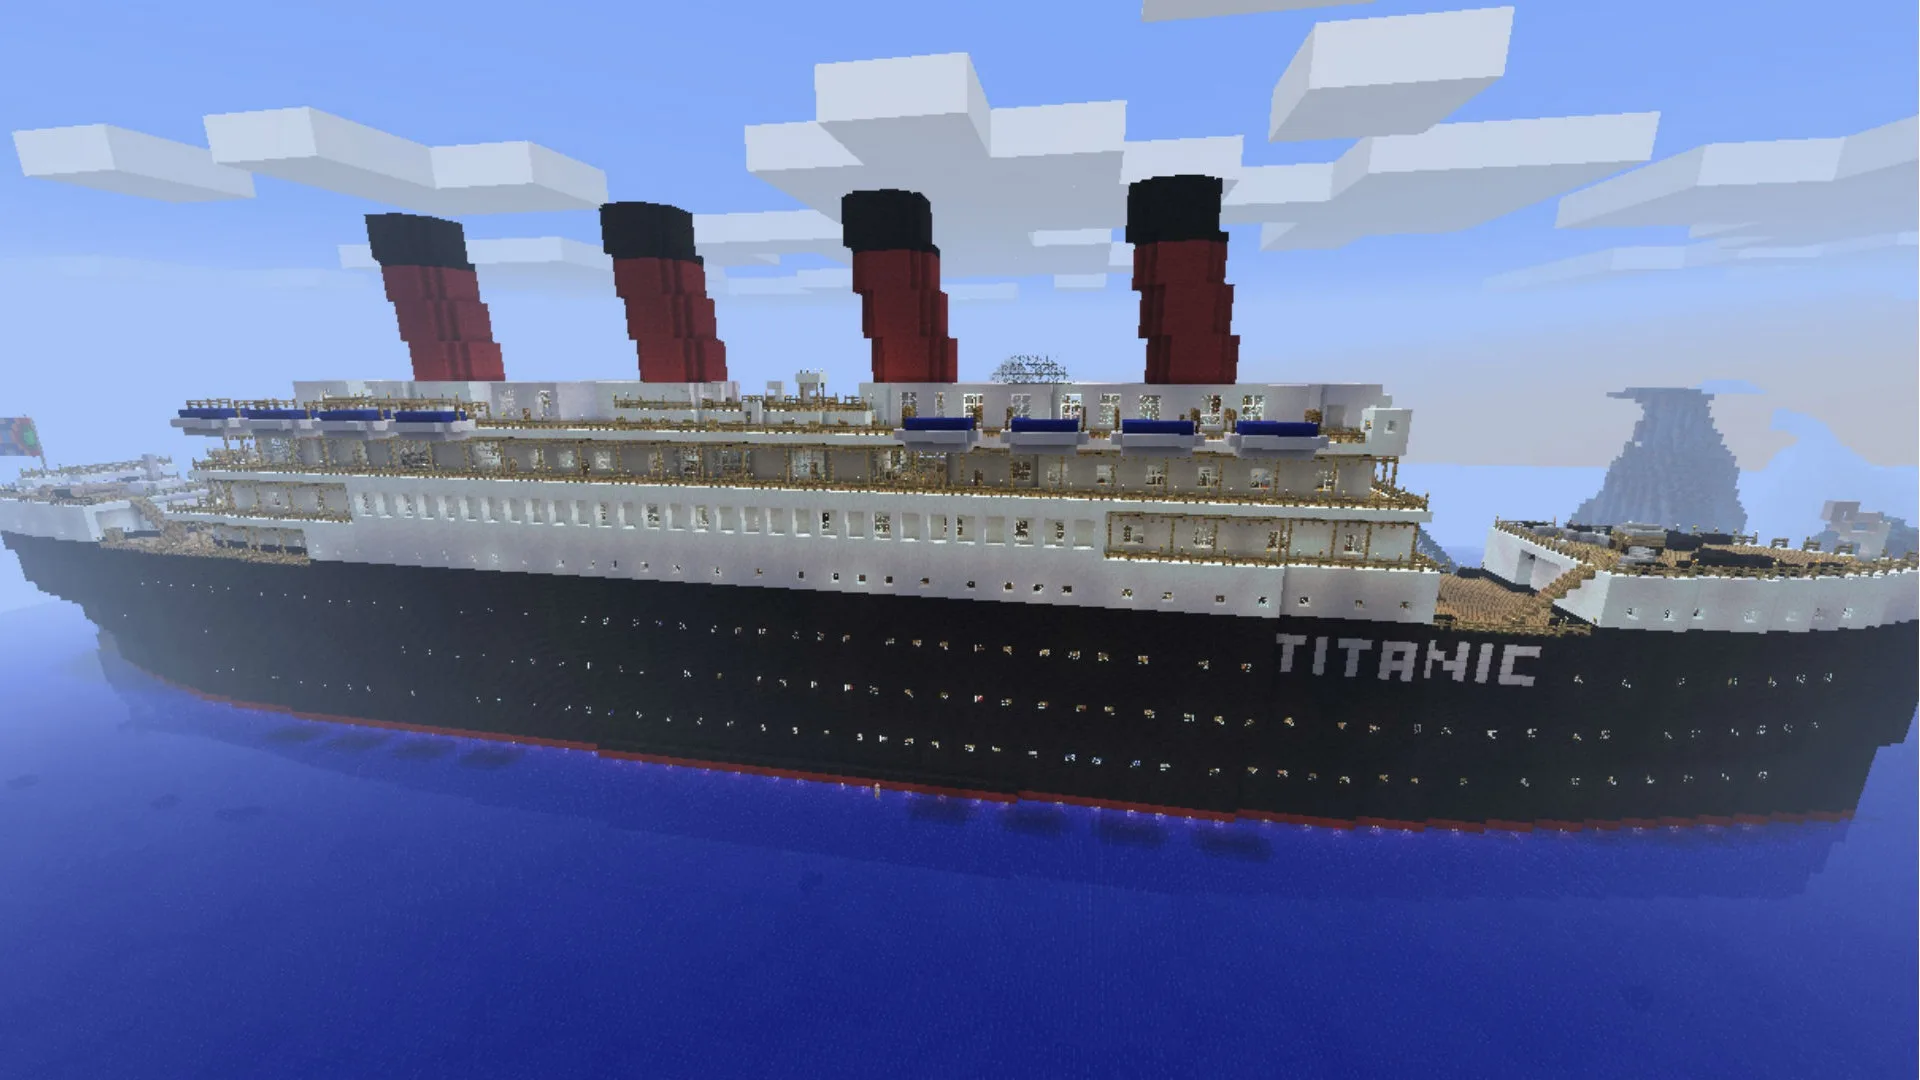 An image of a Minecraft build of the RMS Titanic sat on the ocean with a blue sky and clouds above it